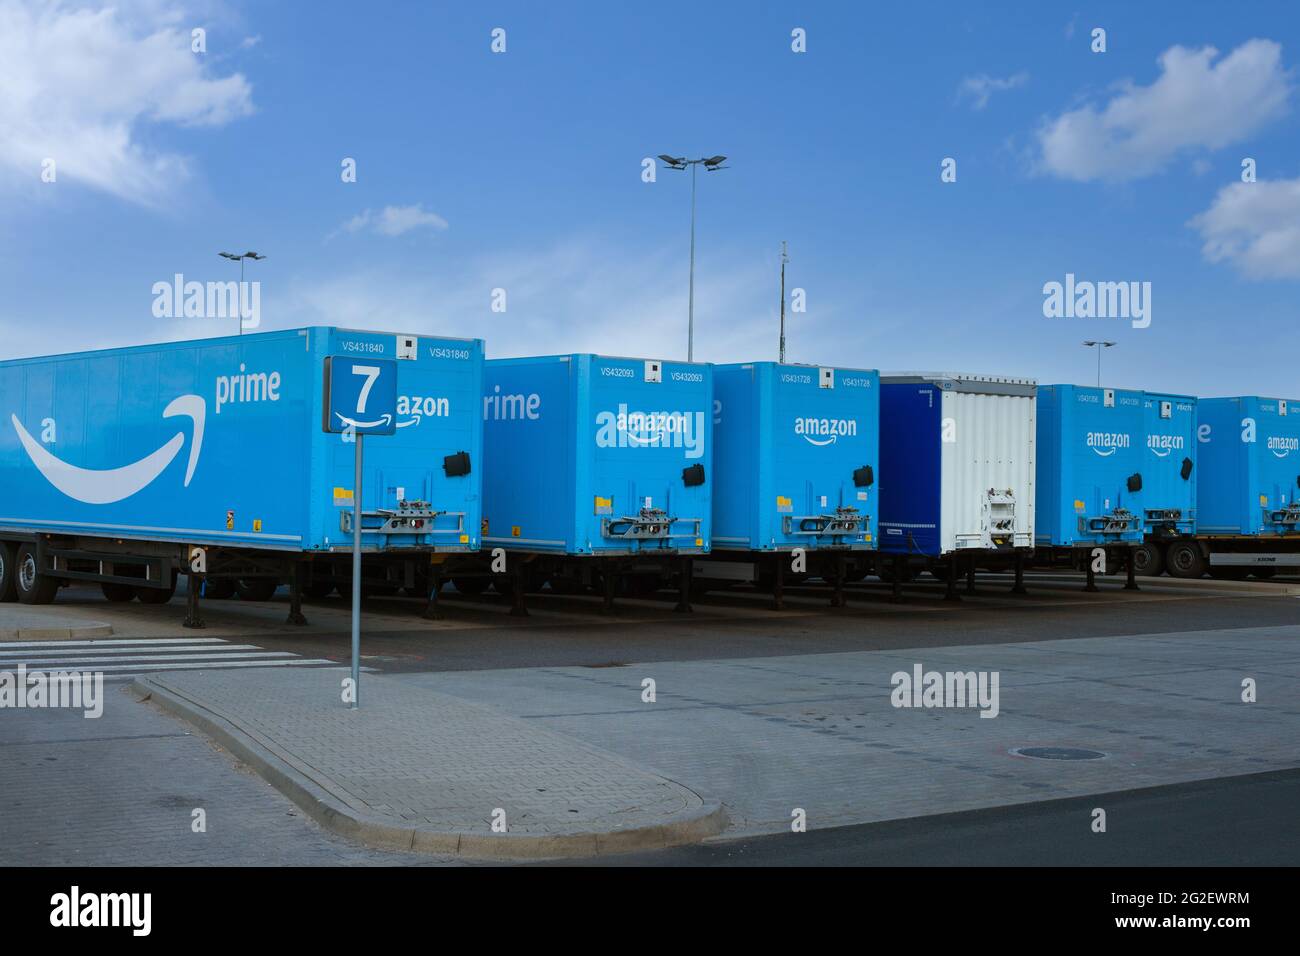 Poland, Sady - May 05, 2021: Amazon trailers parked in the parking lot next to the warehouses. LOGISTICS Stock Photo